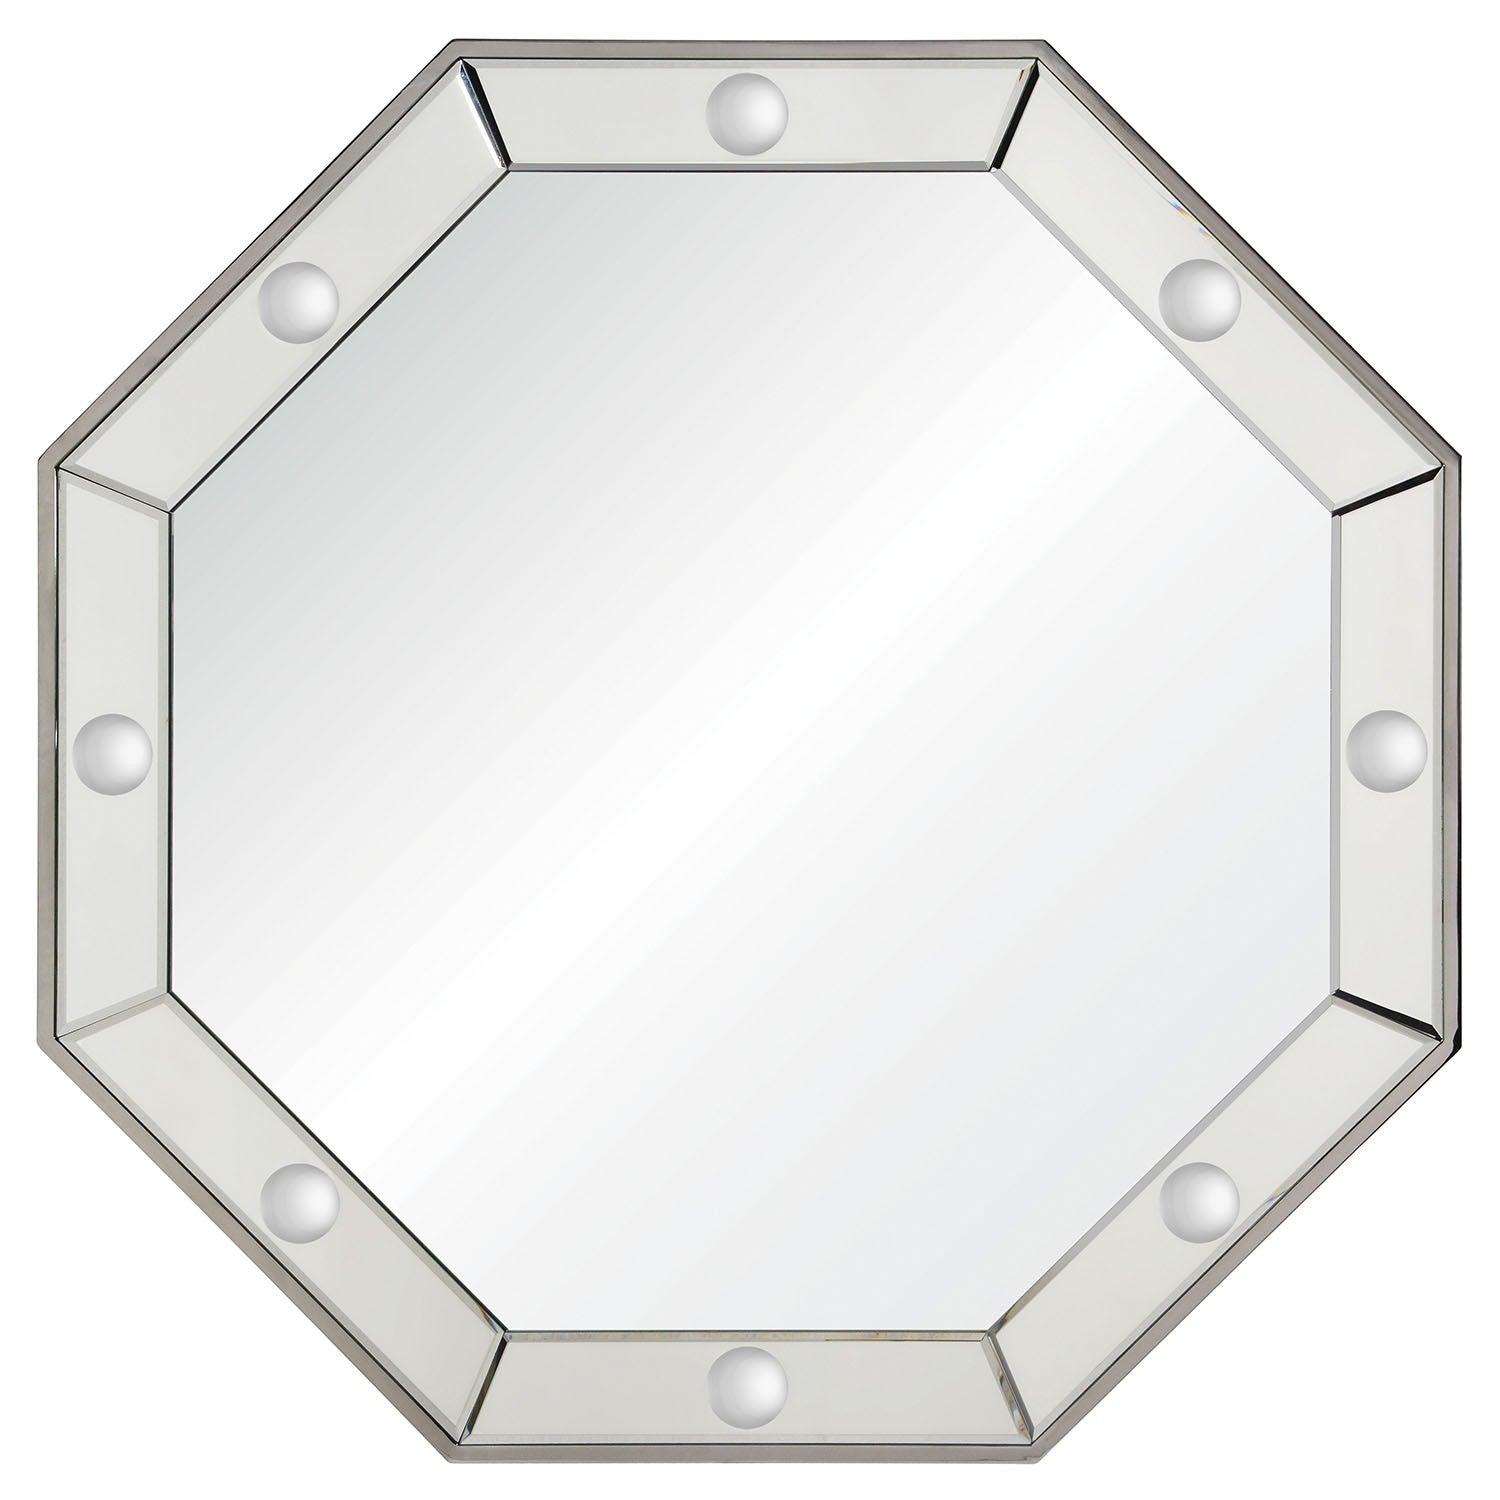 mirror home octagonal polished stainless steel mirror